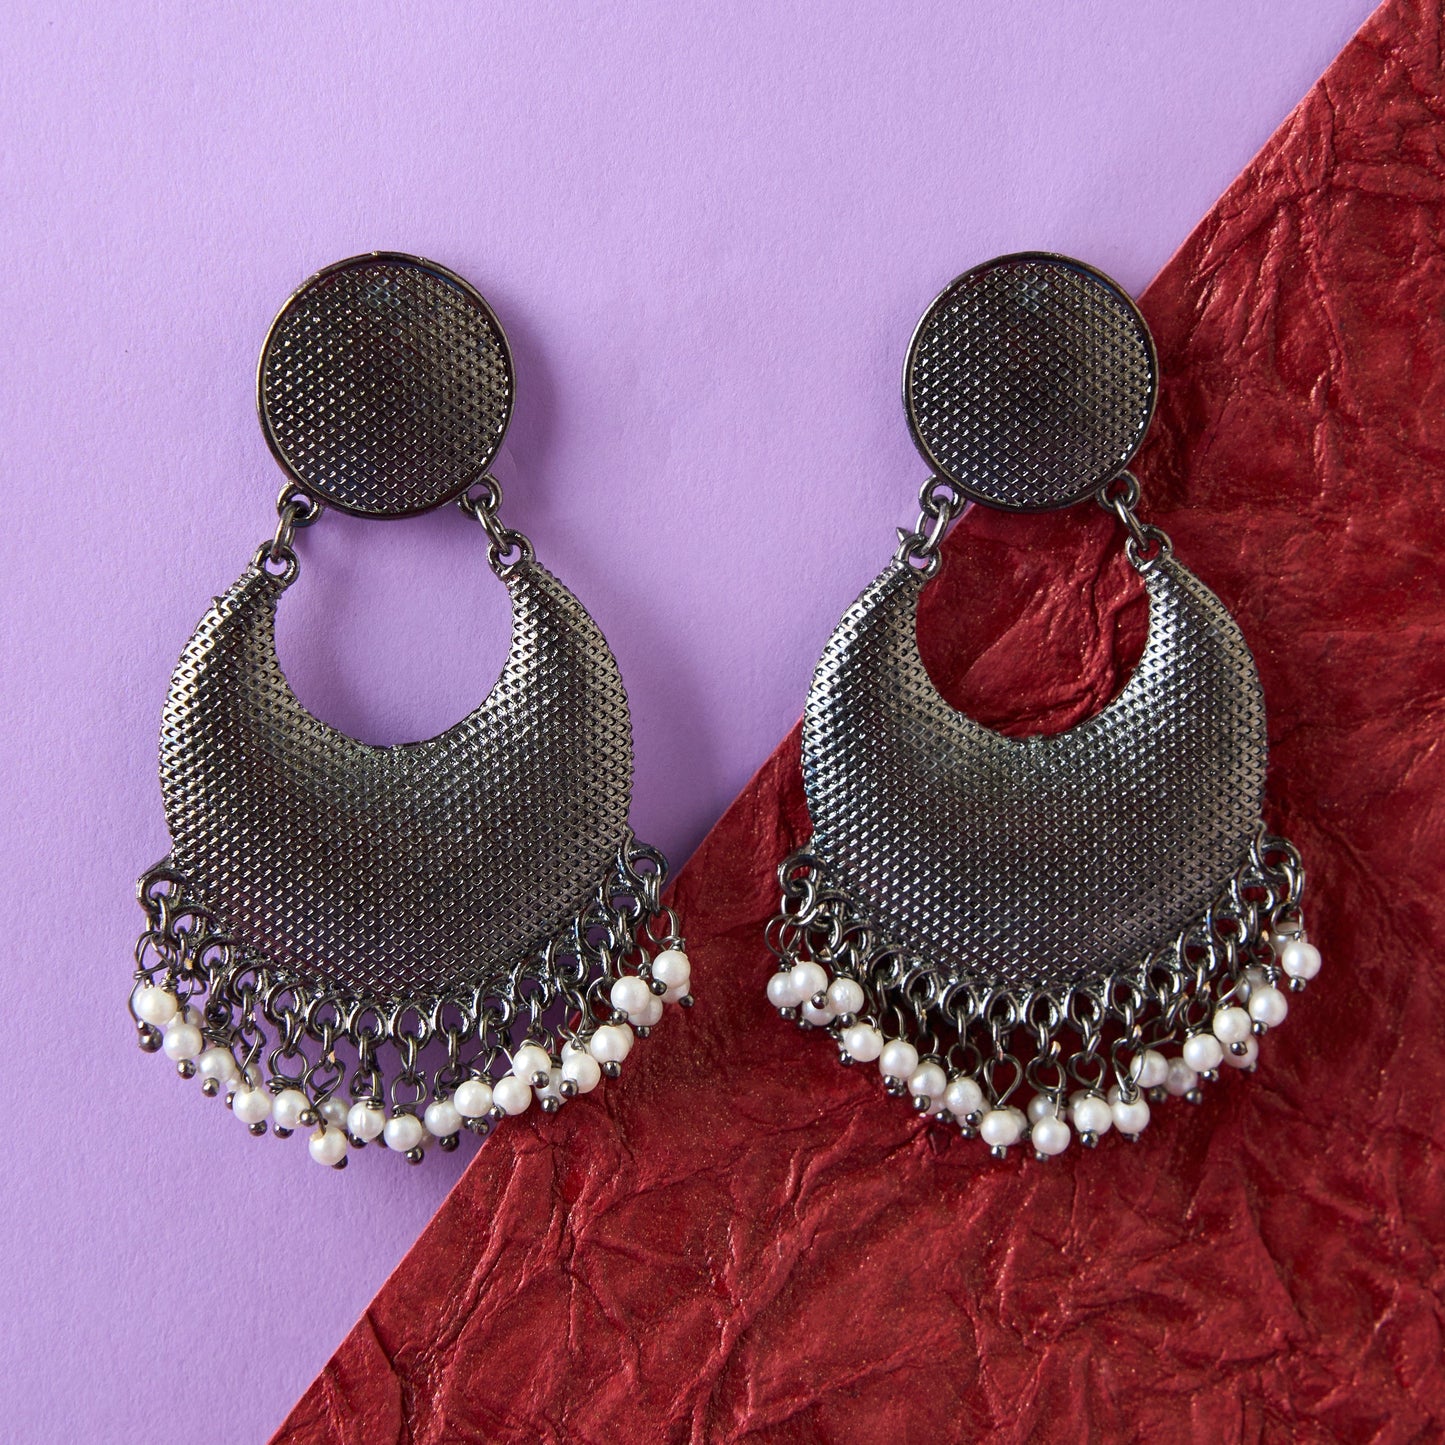 Moonstruck Antique Silver Oxidized Lightweight Traditional Stylish Indian Bollywood Chandbali Dangle Earrings with Pearls for Women - www.MoonstruckINC.com